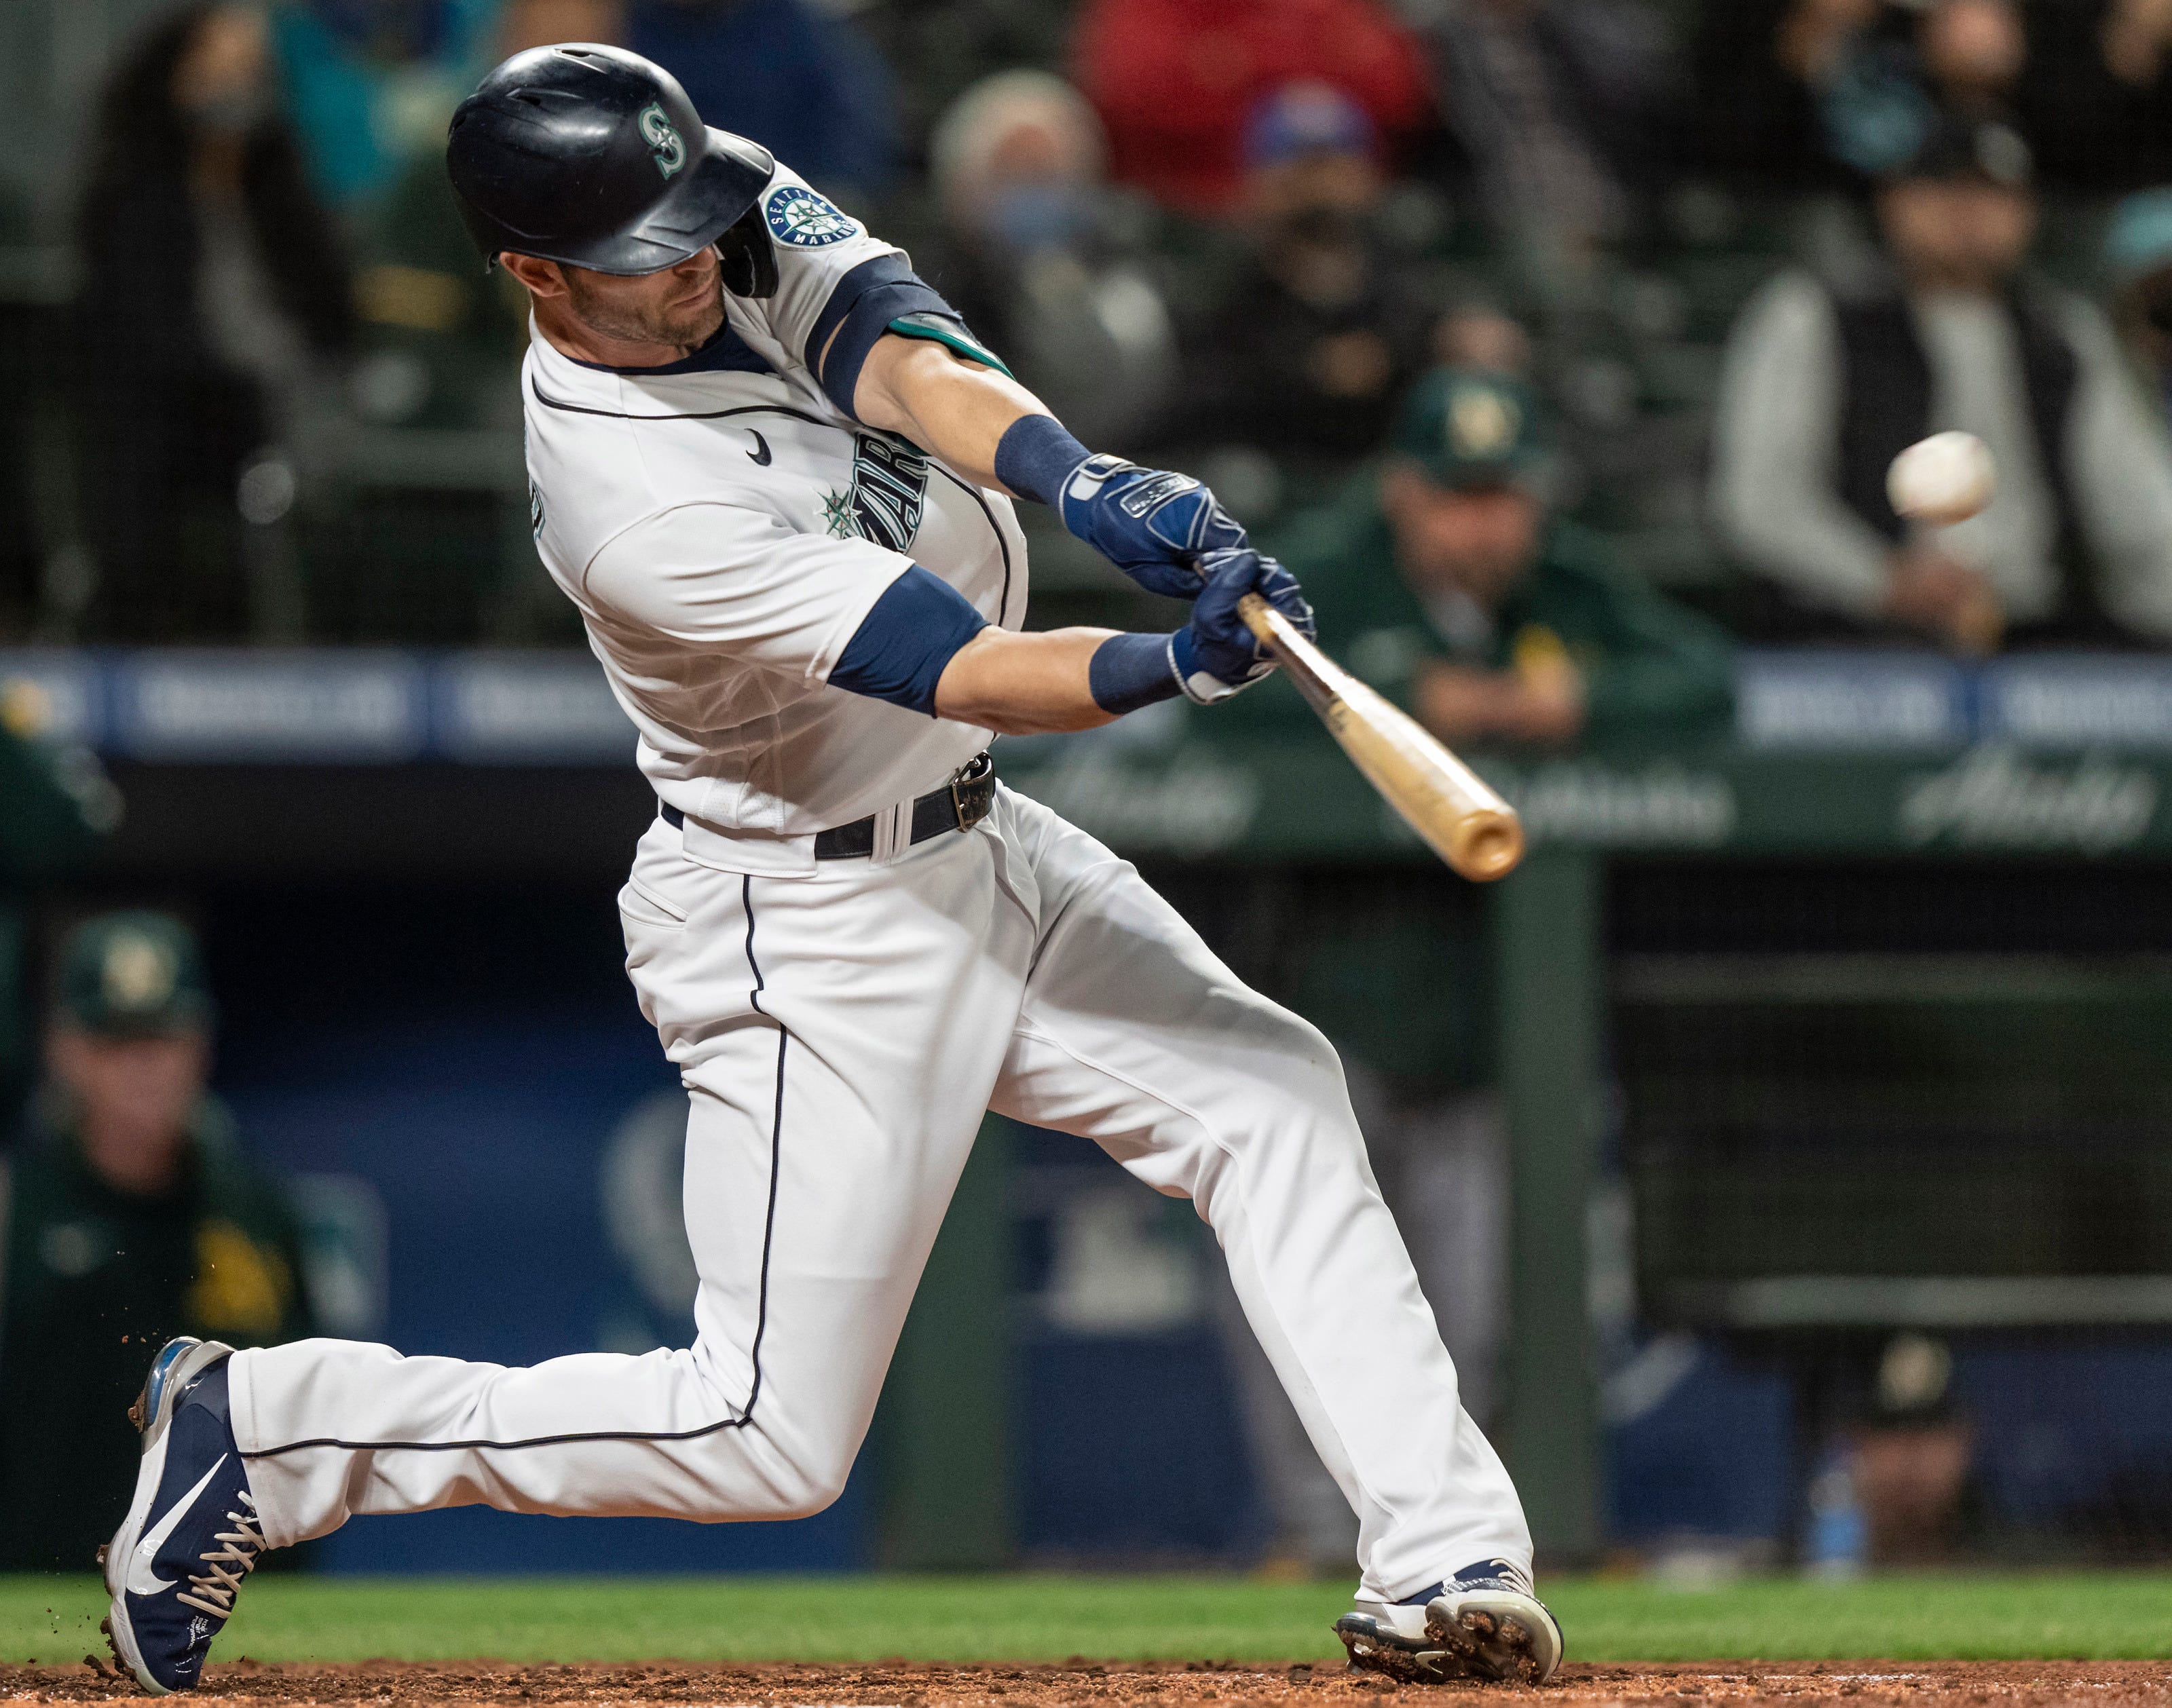 Mariners Updates: Ty France back from IL; latest on Haniger, Lewis